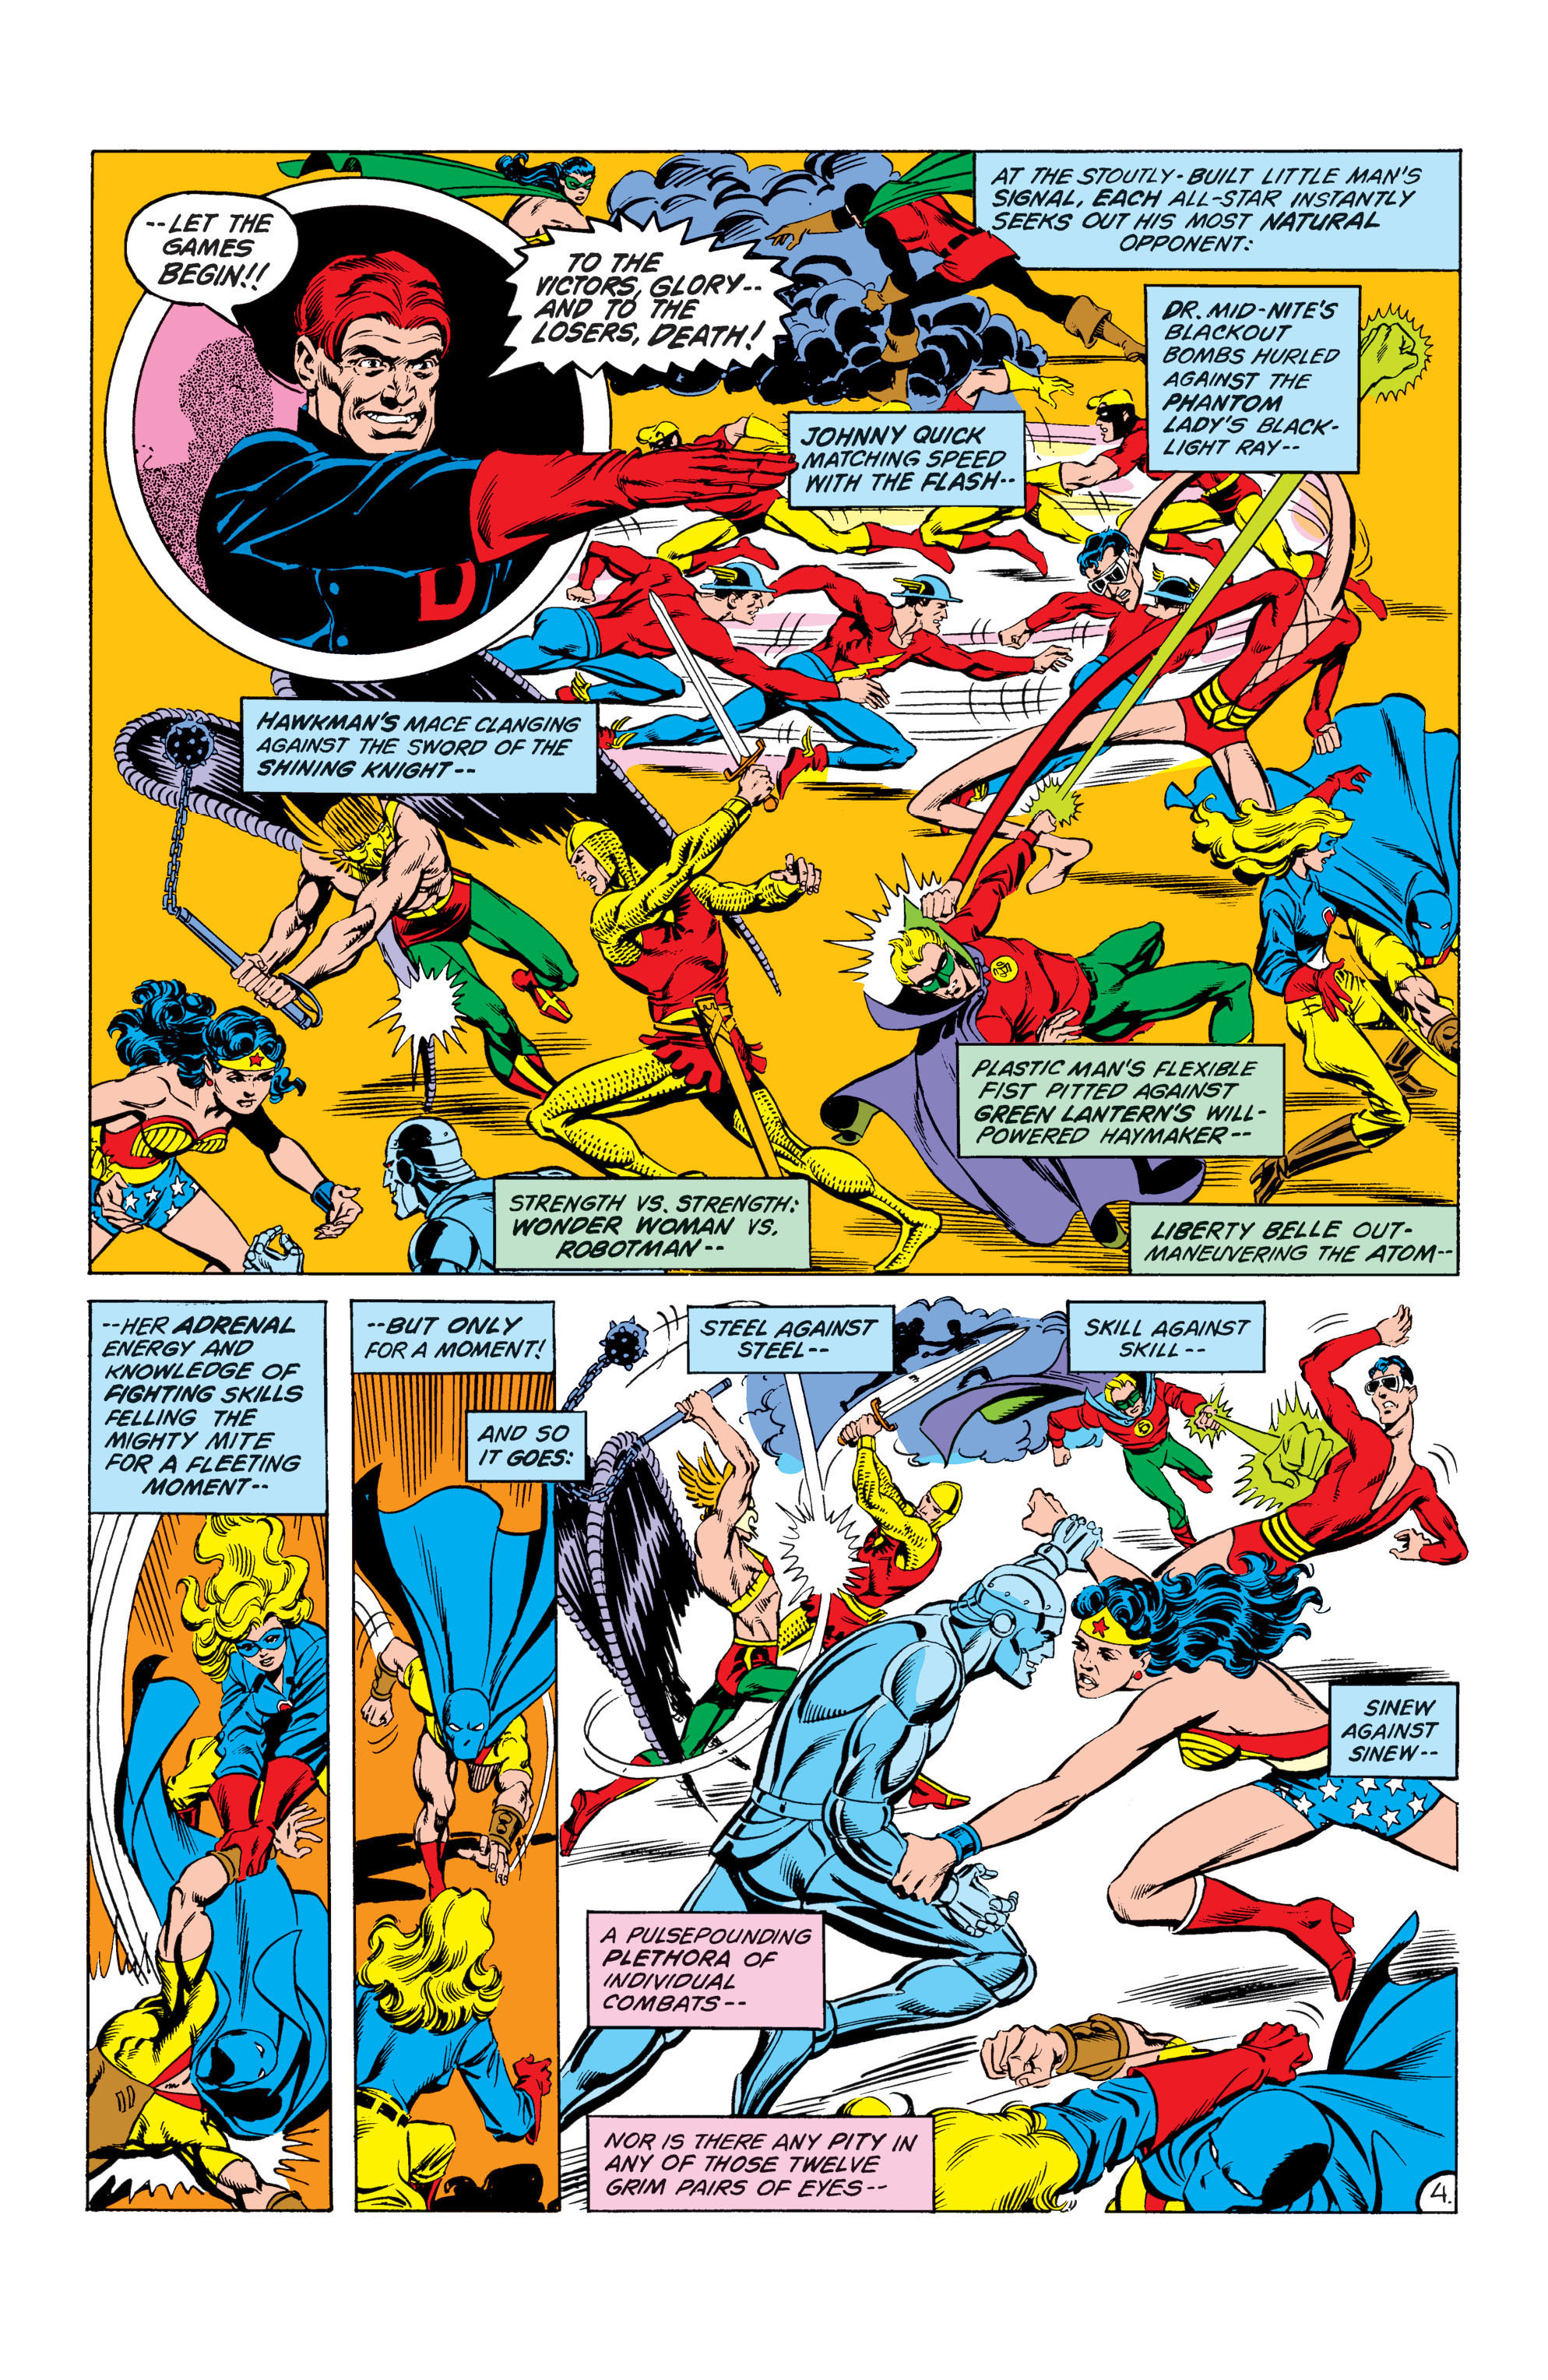 Crisis on Multiple Earths Omnibus: Chapter Crisis-on-Multiple-Earths-44 - Page 4